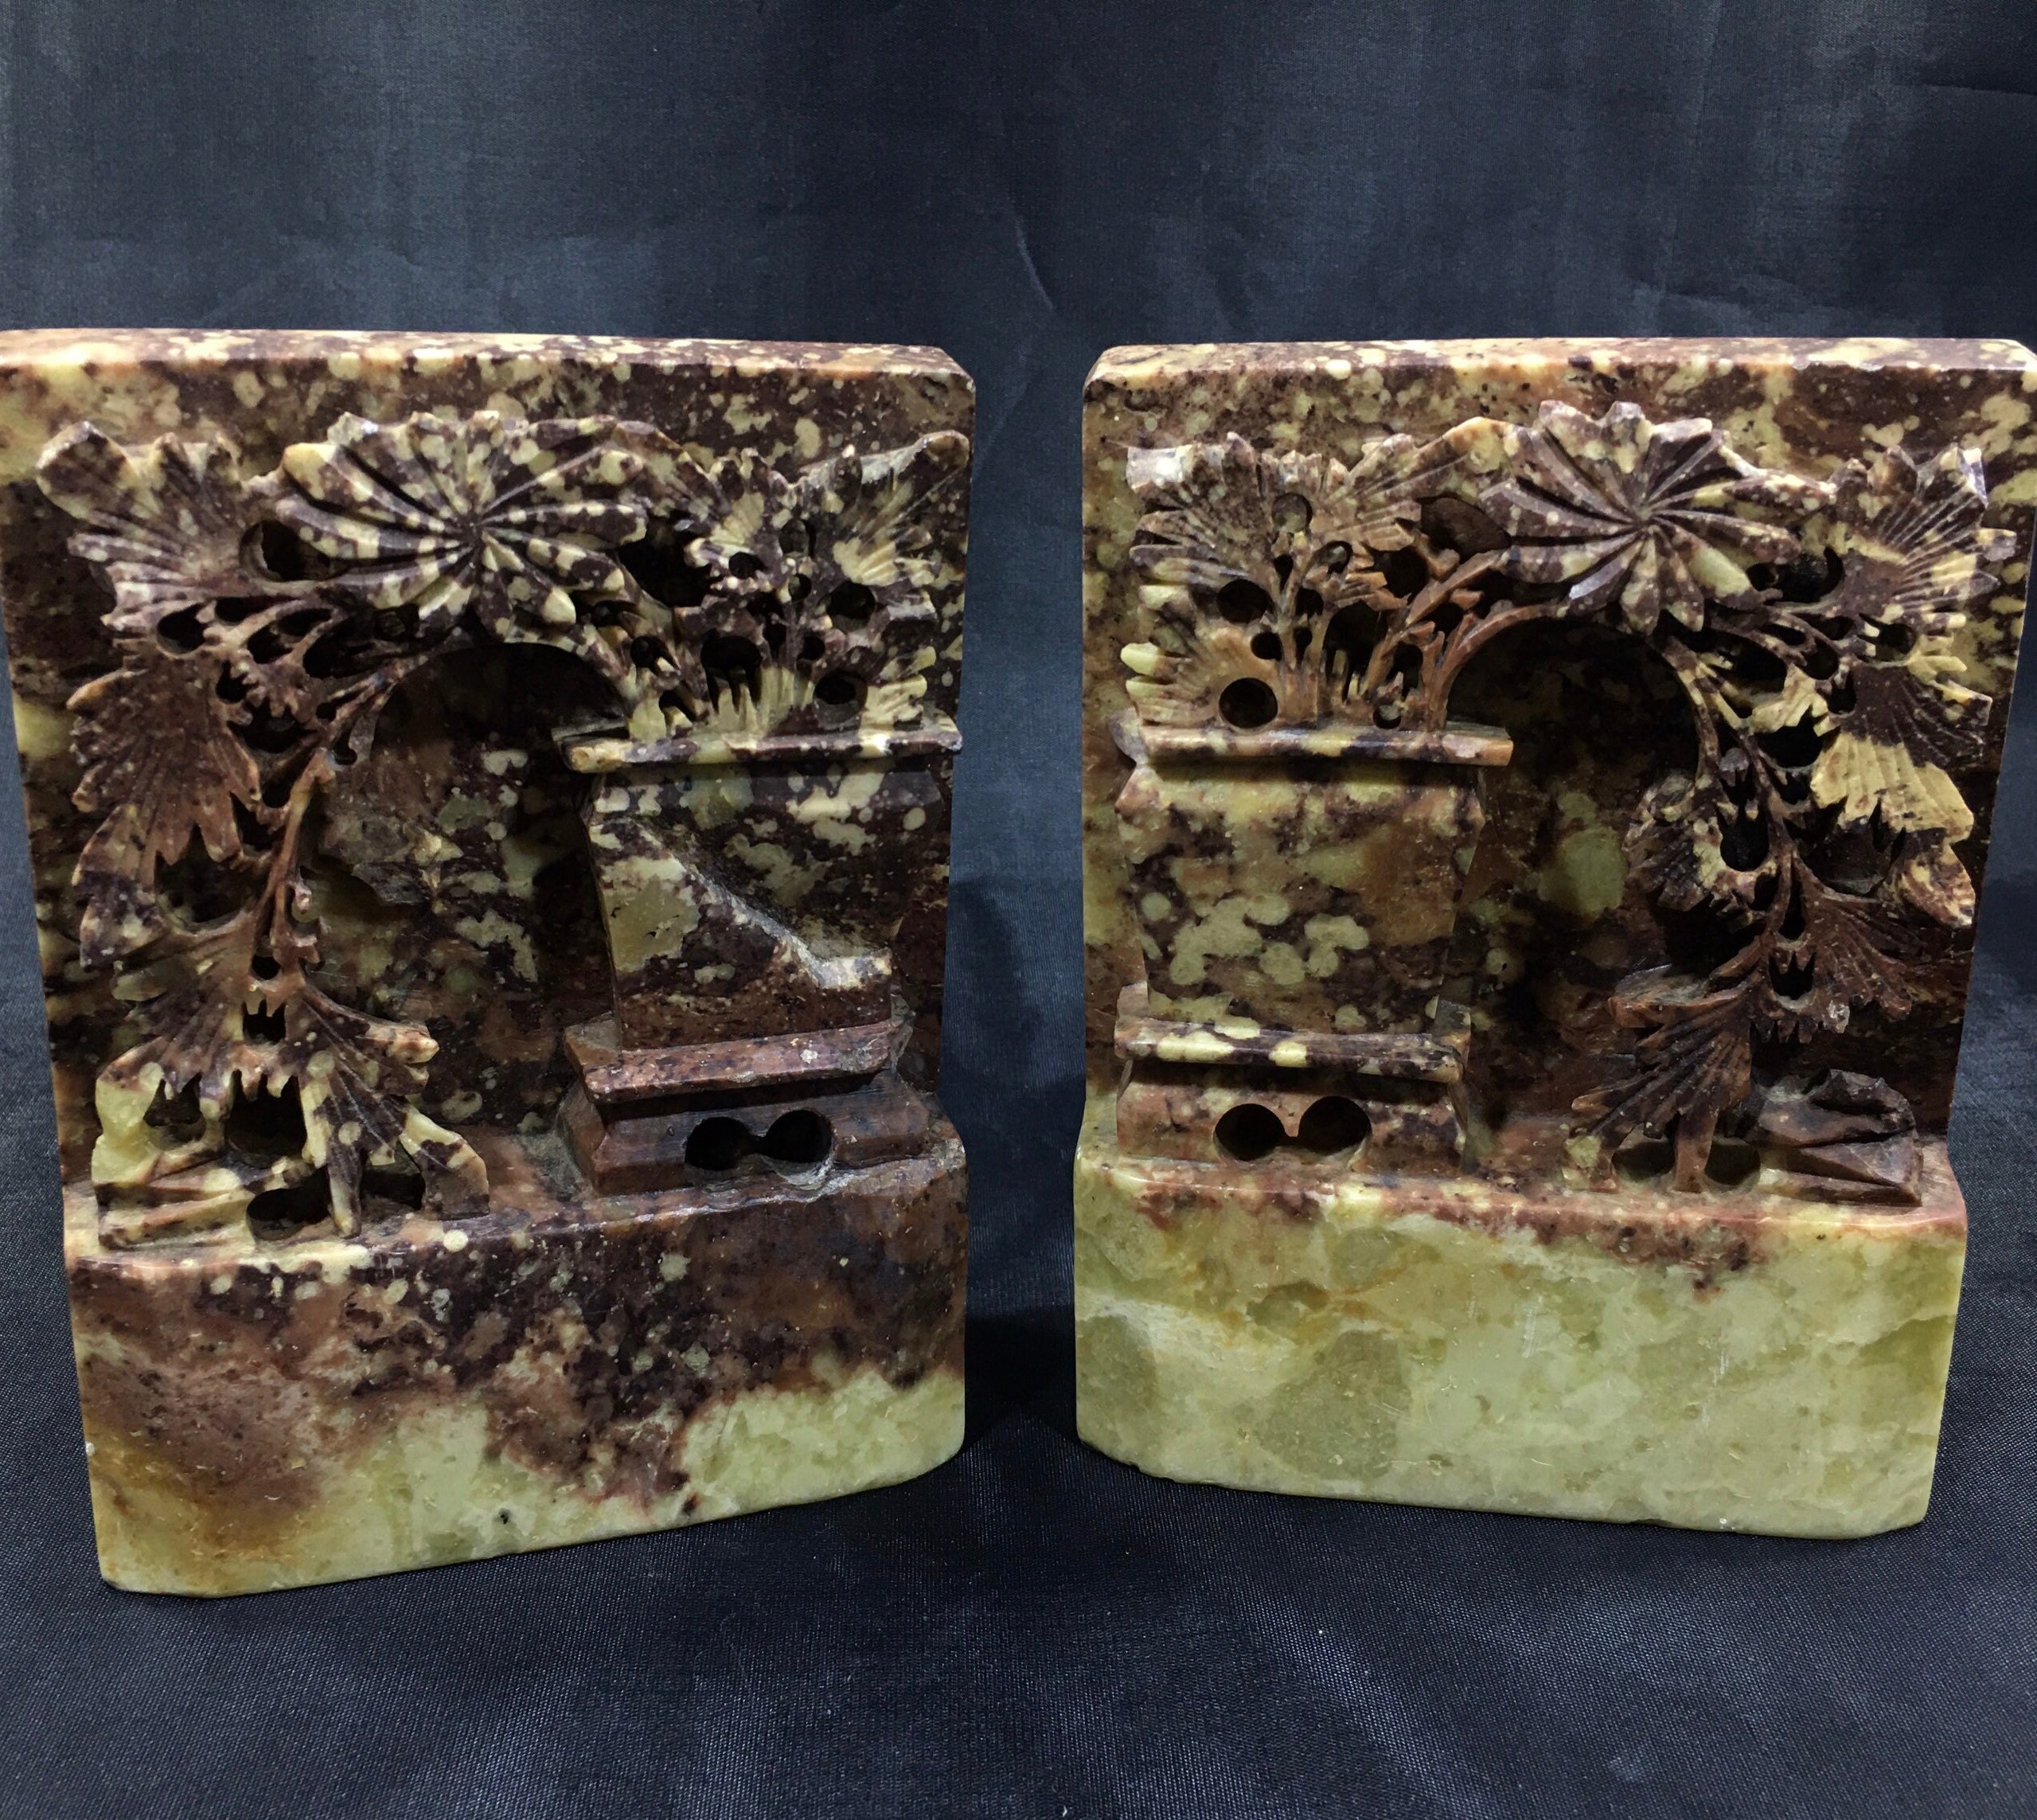 Vintage Chinese Soapstone Block Bookend or Sculpture Carving